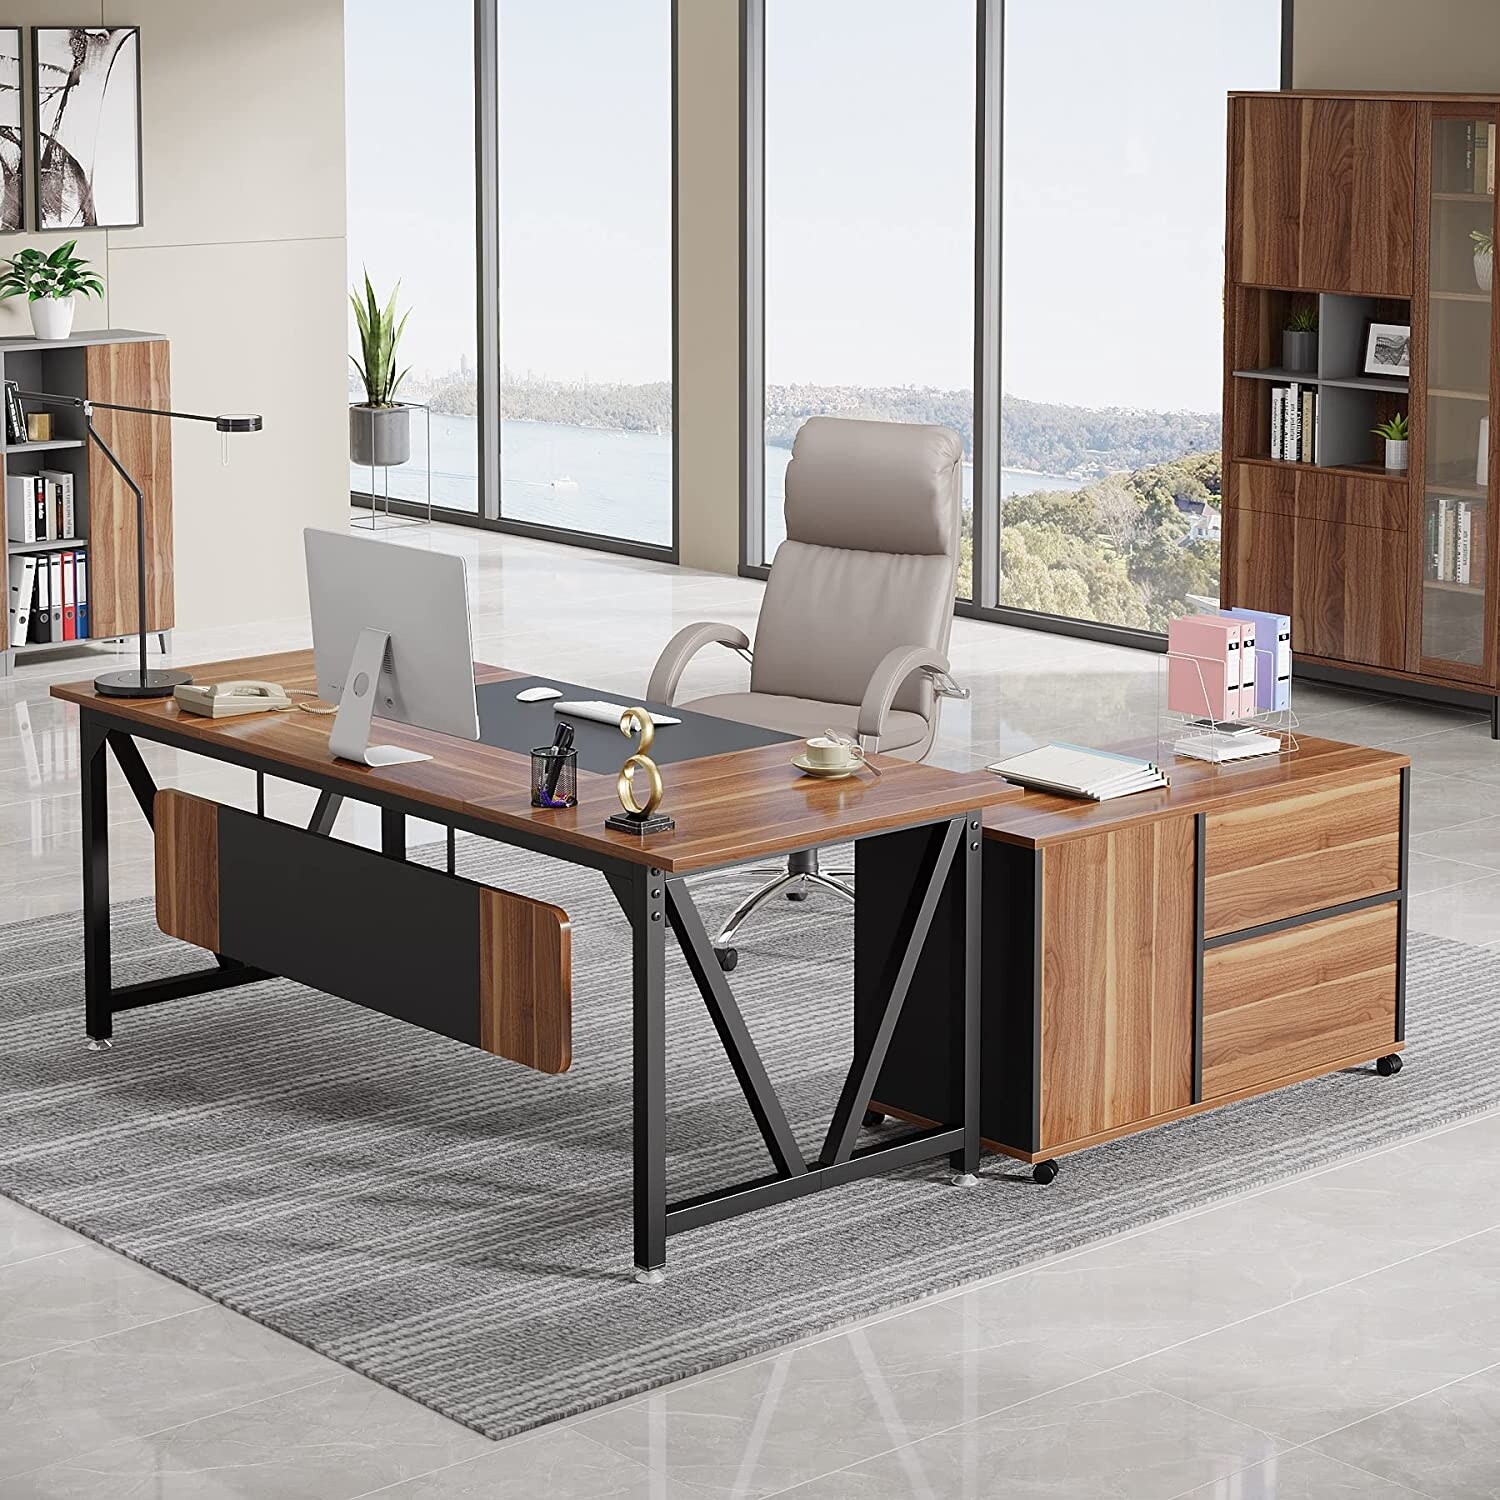 https://ak1.ostkcdn.com/images/products/is/images/direct/38b2f566fc40e89ba77ffd244da6d725badb5489/Desk-with-File-Cabinet-Combo%2C-Industrial-L-Shaped-Desk-with-Drawers.jpg